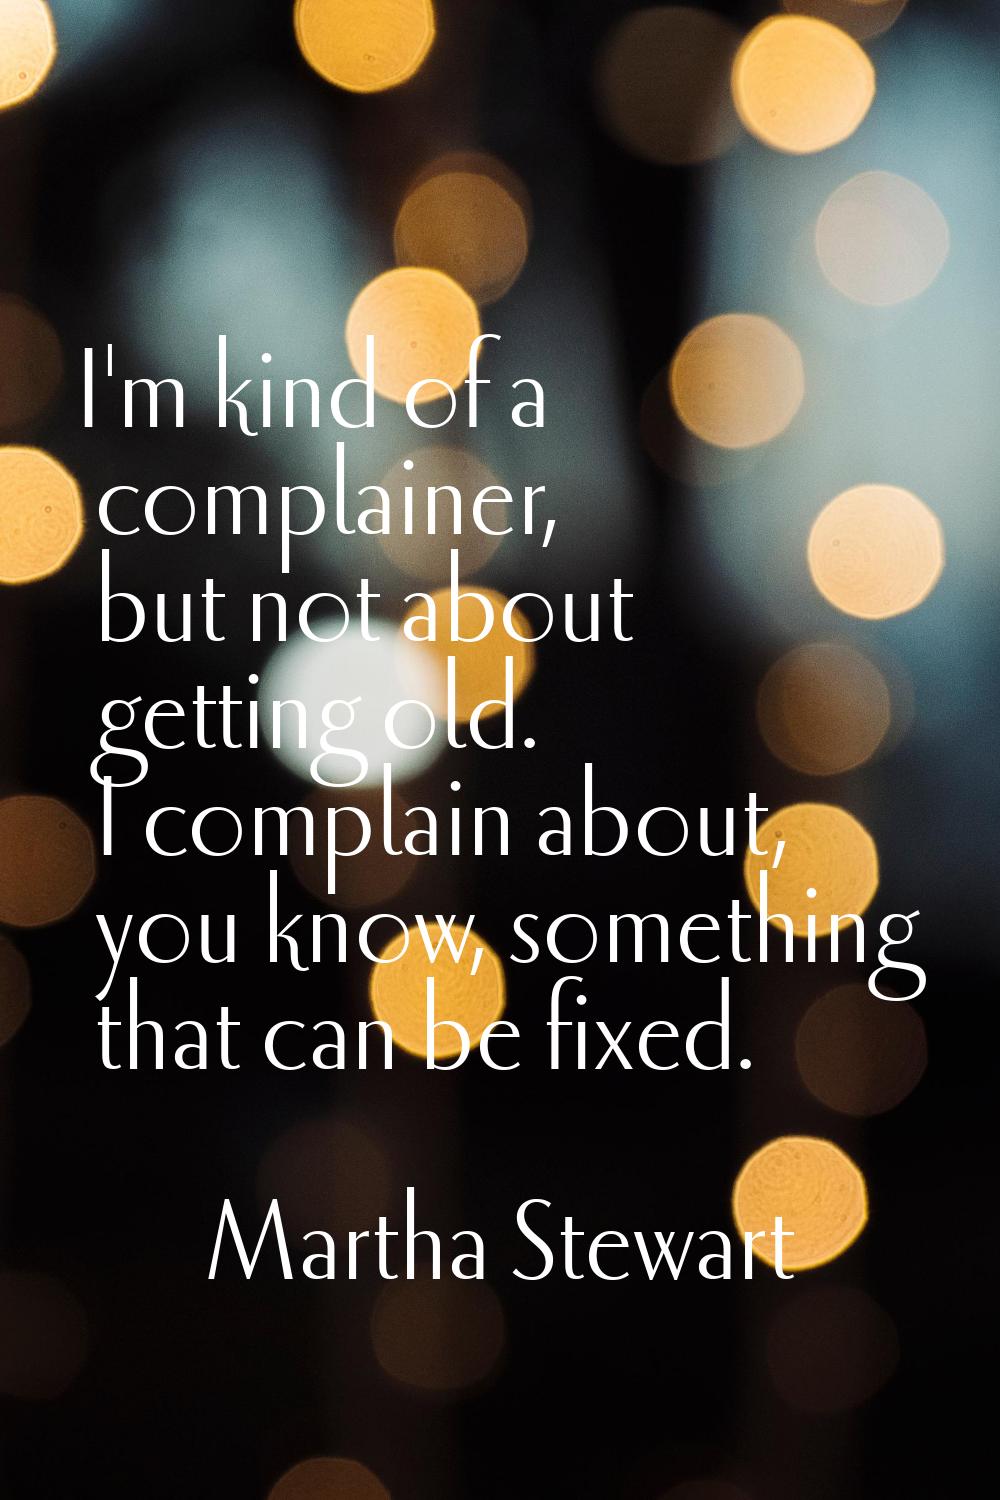 I'm kind of a complainer, but not about getting old. I complain about, you know, something that can